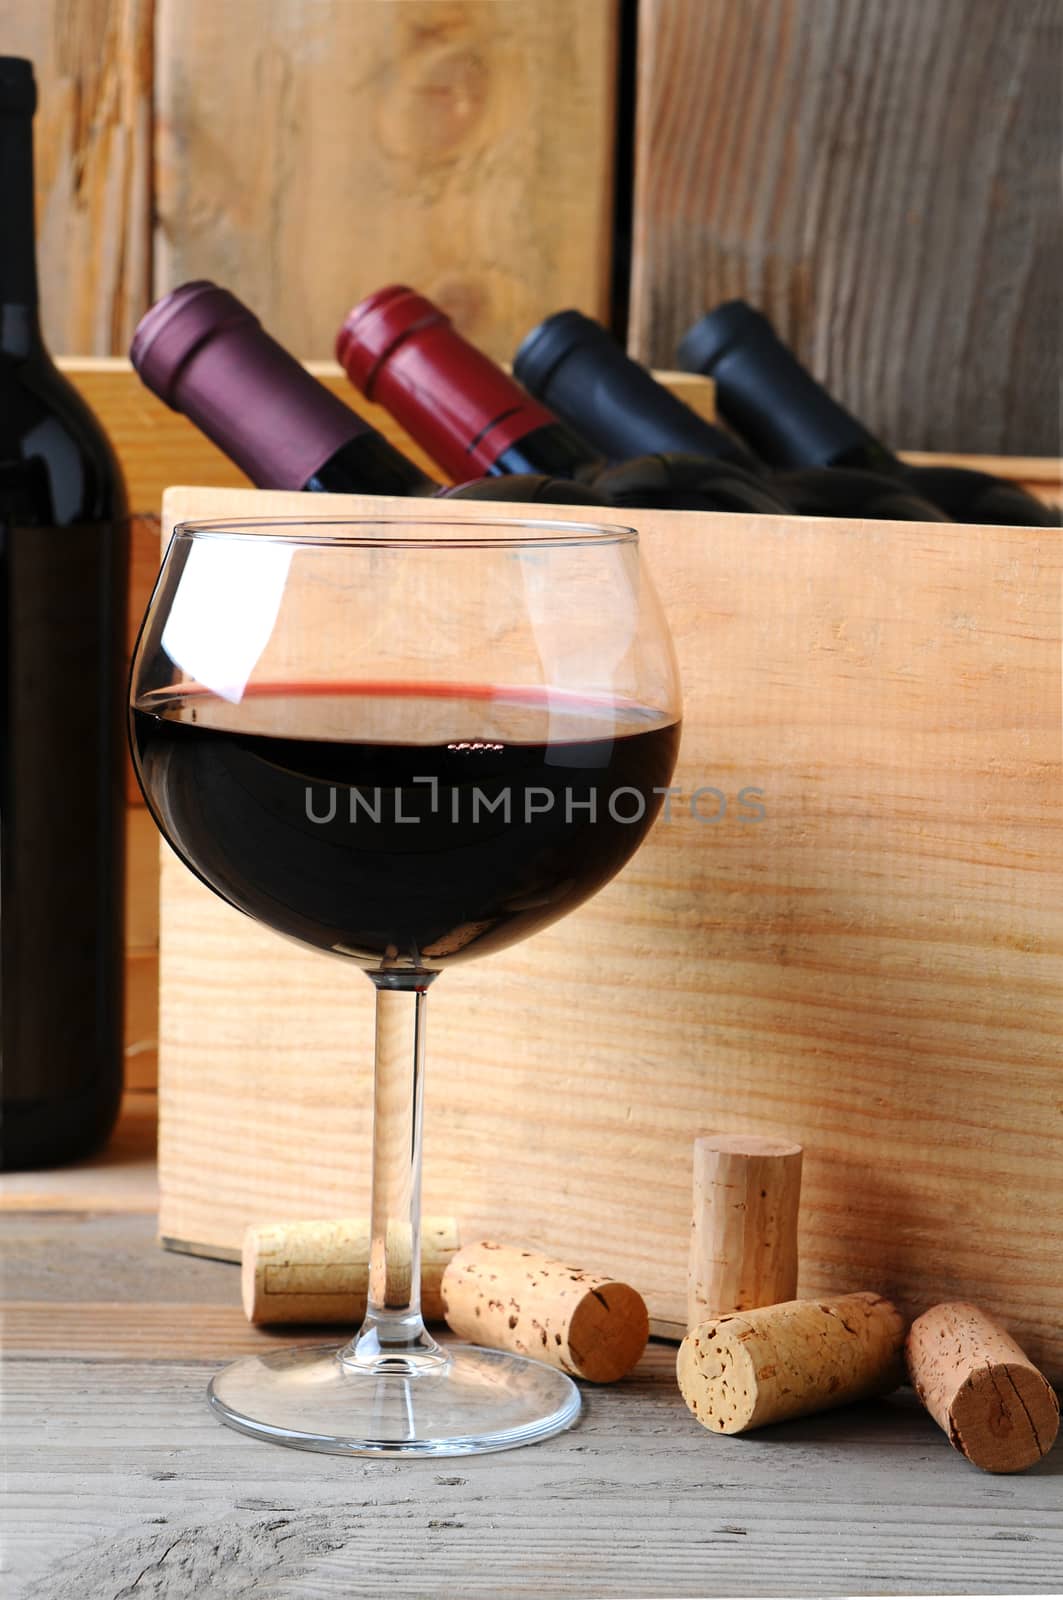 A glass of red wine in front of a wooden case of wine bottles on a rustic wood background. Vertical Format.